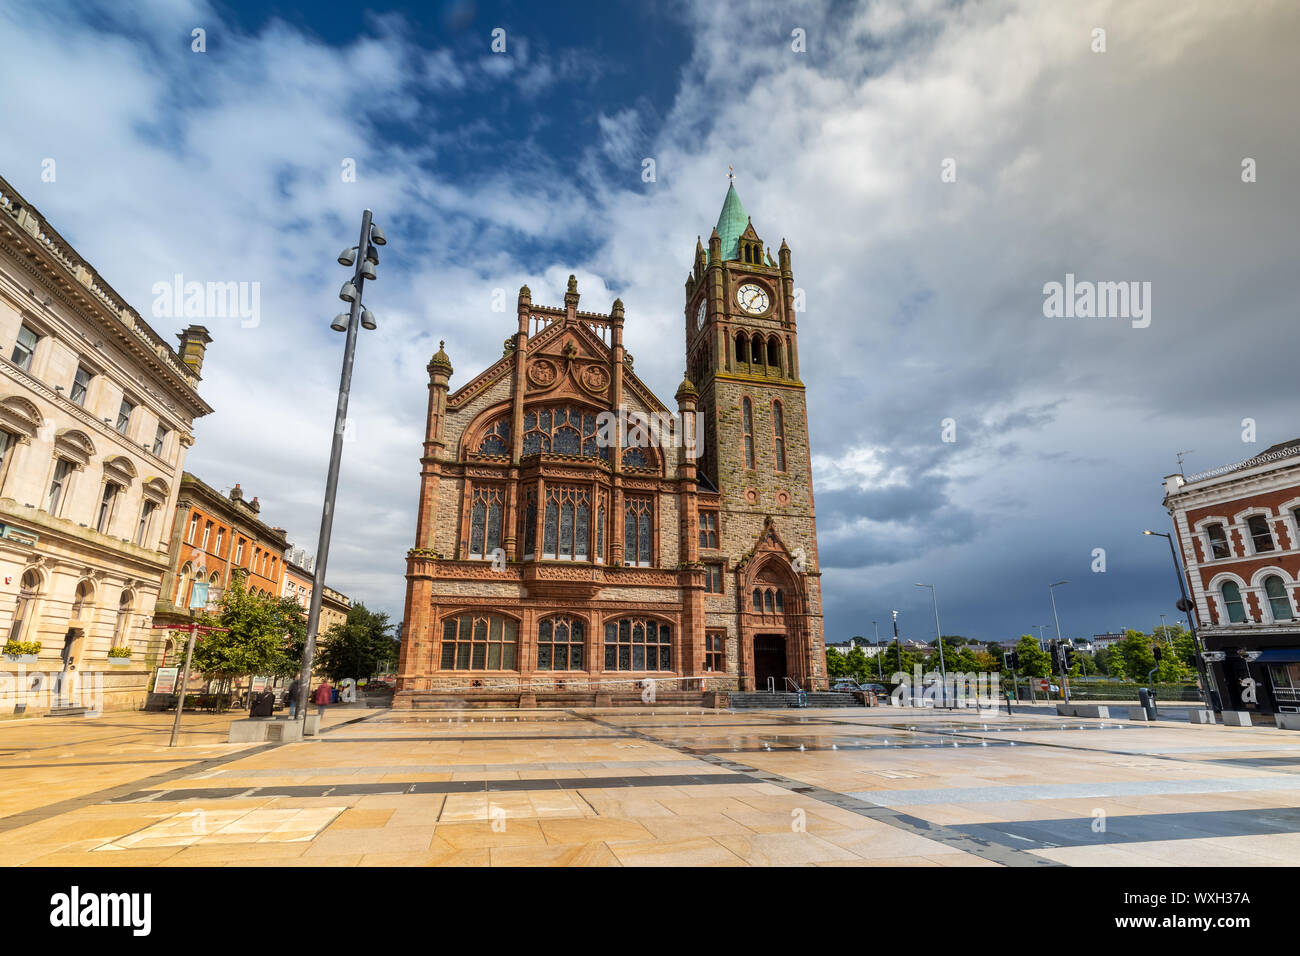 The Guildhall in Londonderry / Derry, Northern Ireland Stock Photo